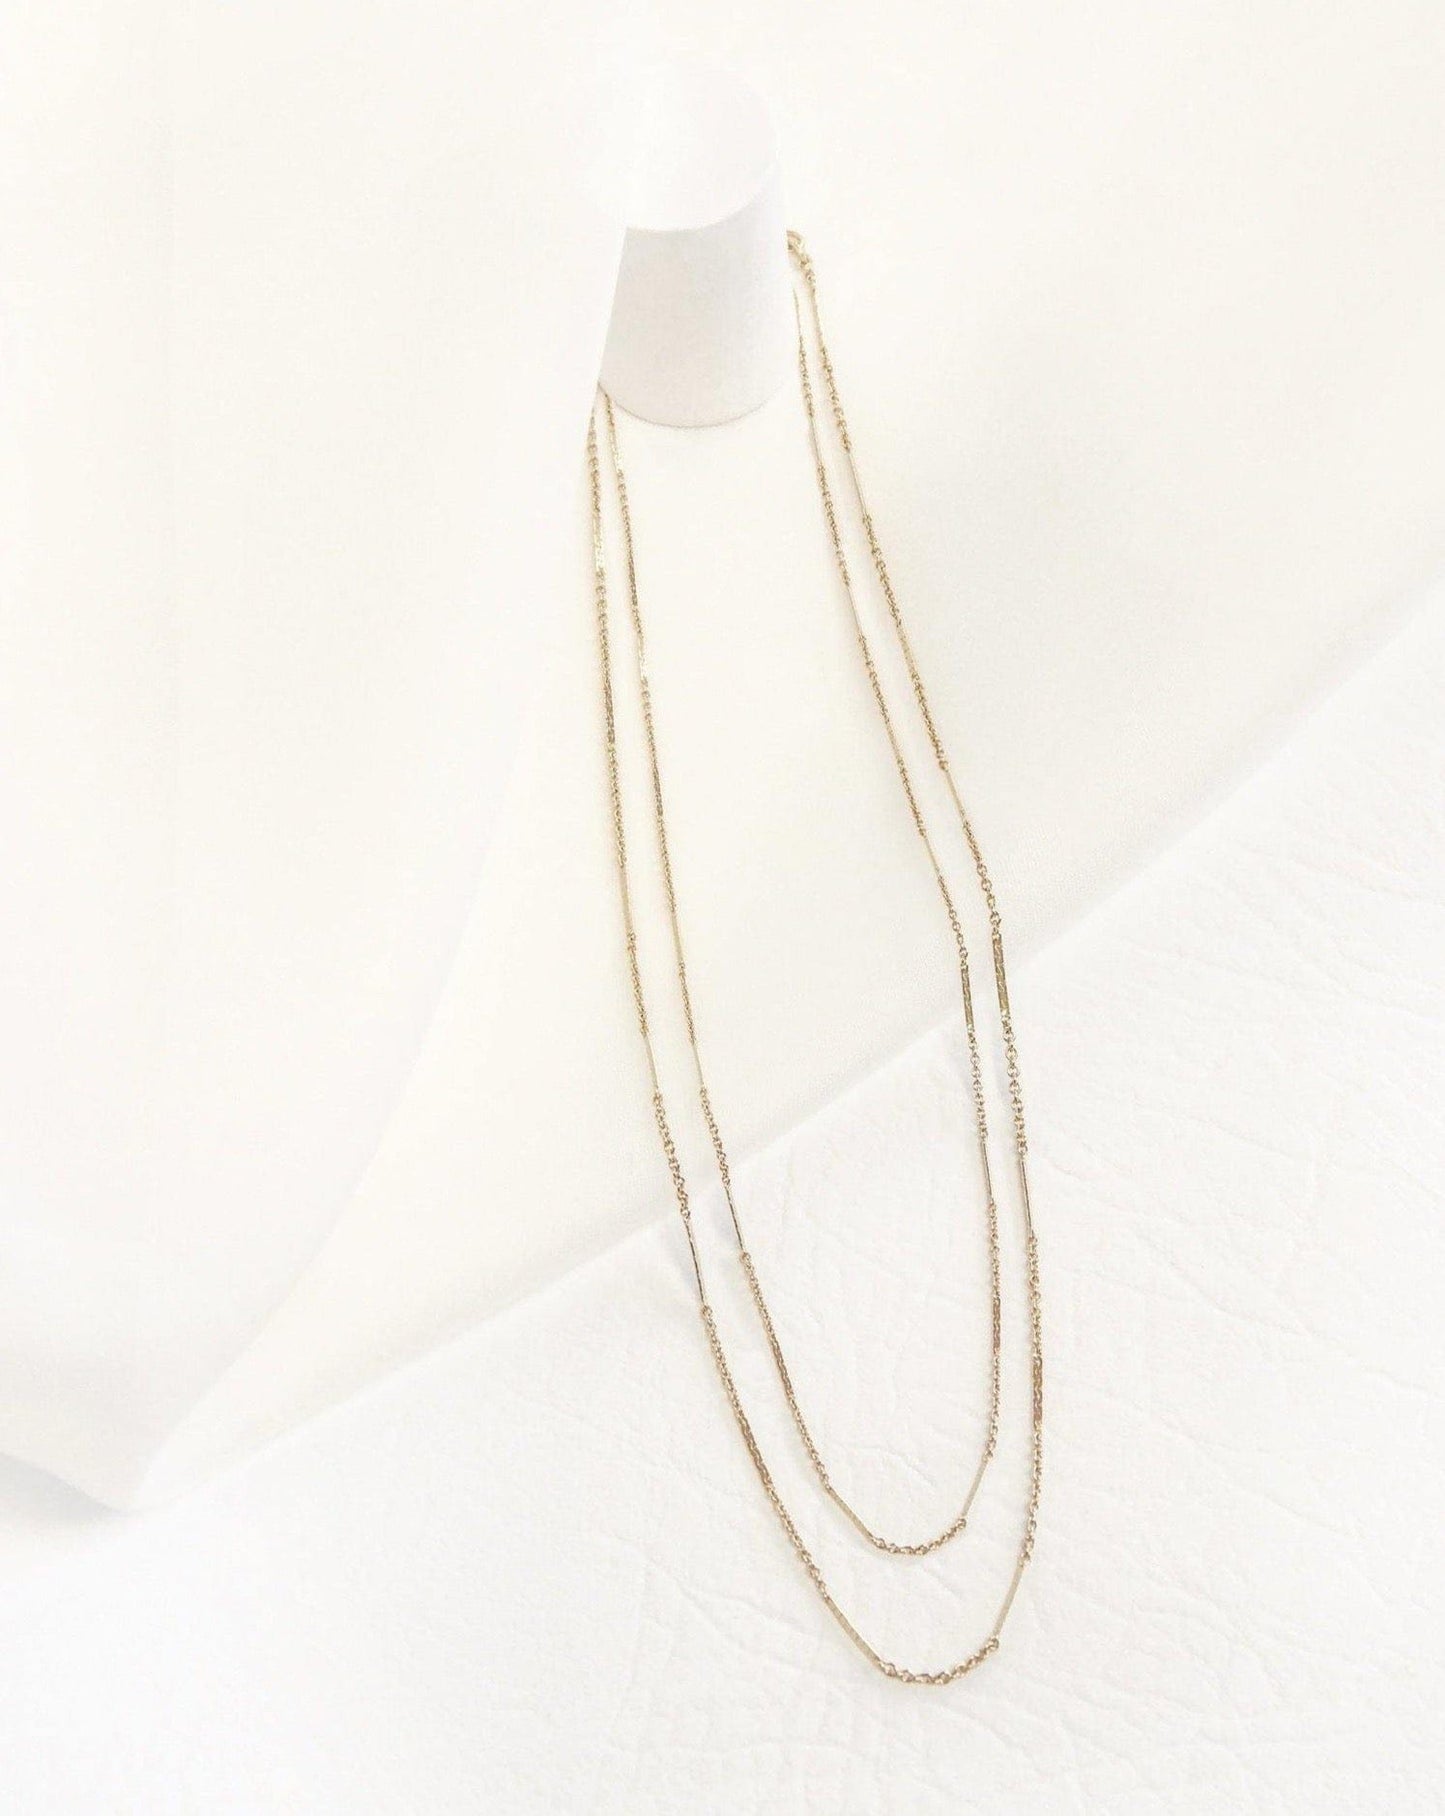 the layered chain necklace, the duo, II - VUE by SEK